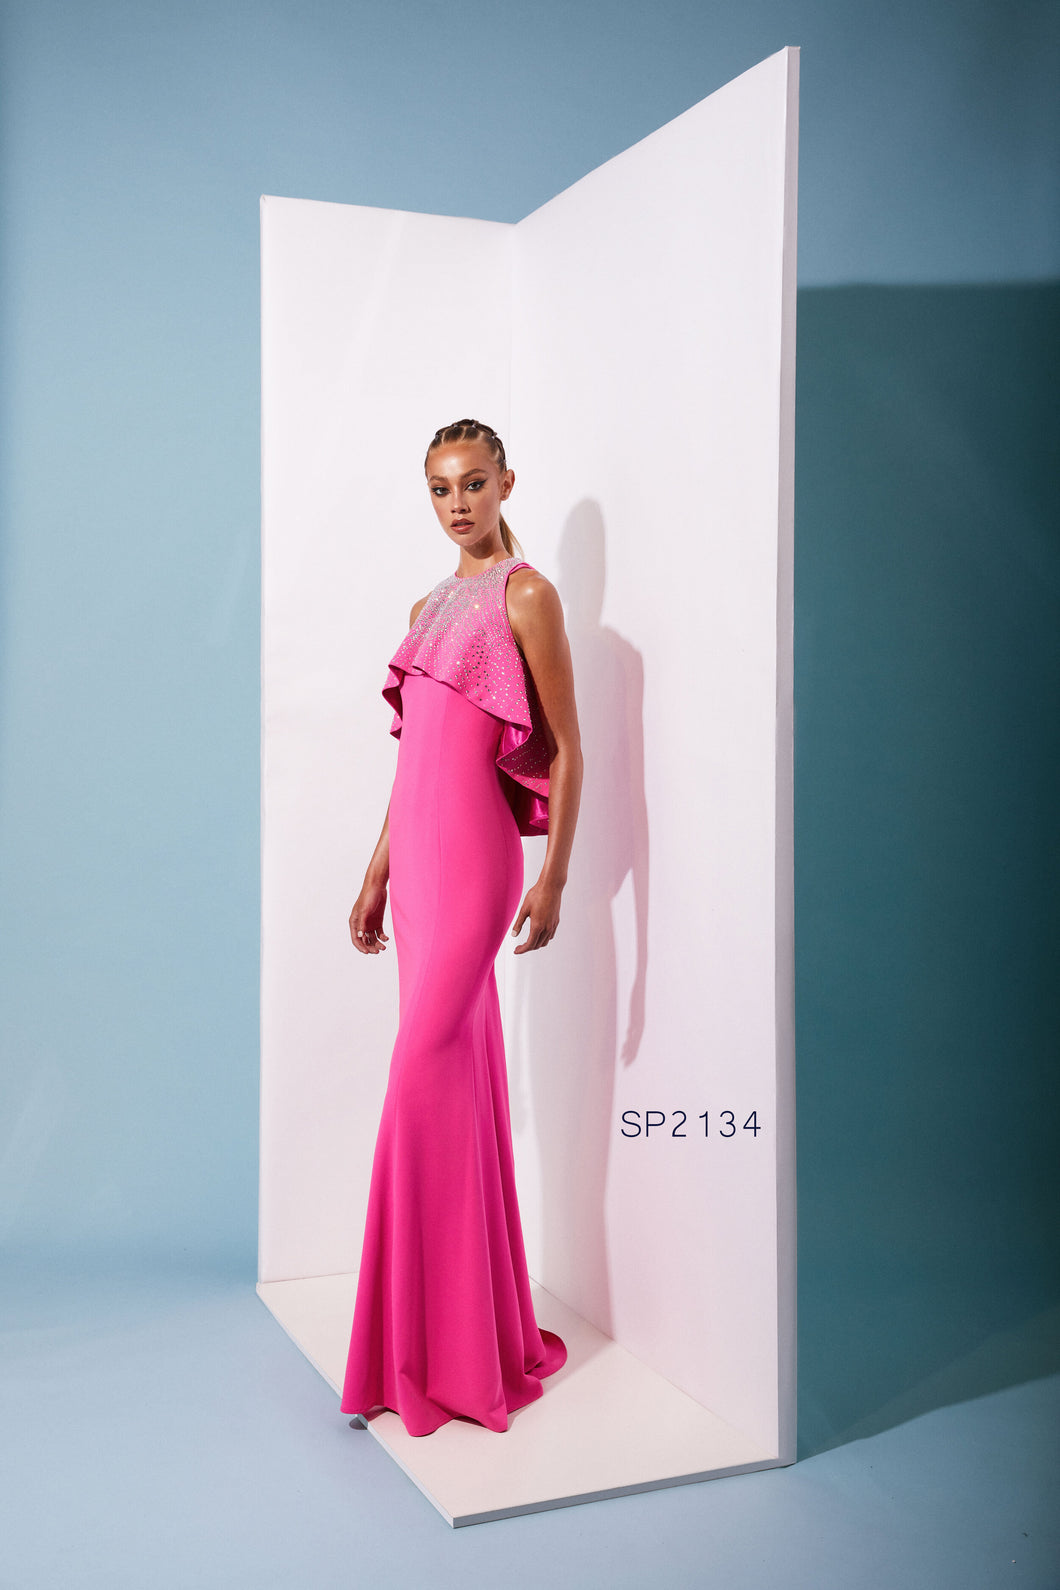 Lucian Matis Halter Evening Gown w/ Dramatic Sparkle Cape EVENING DRESSES, LONG DRESS, MOTHER OF THE BRIDE DRESS MOTHER OF THE GROOM DRESS, WEDDING GUEST DRESSES, Long Island, New York, Mother of the Bride gowns near me, Woodbury Greenvale Mother of the Bride dresses Bat Mitzvah Bar Mitzvah, Evening Wear, Wedding Wear.